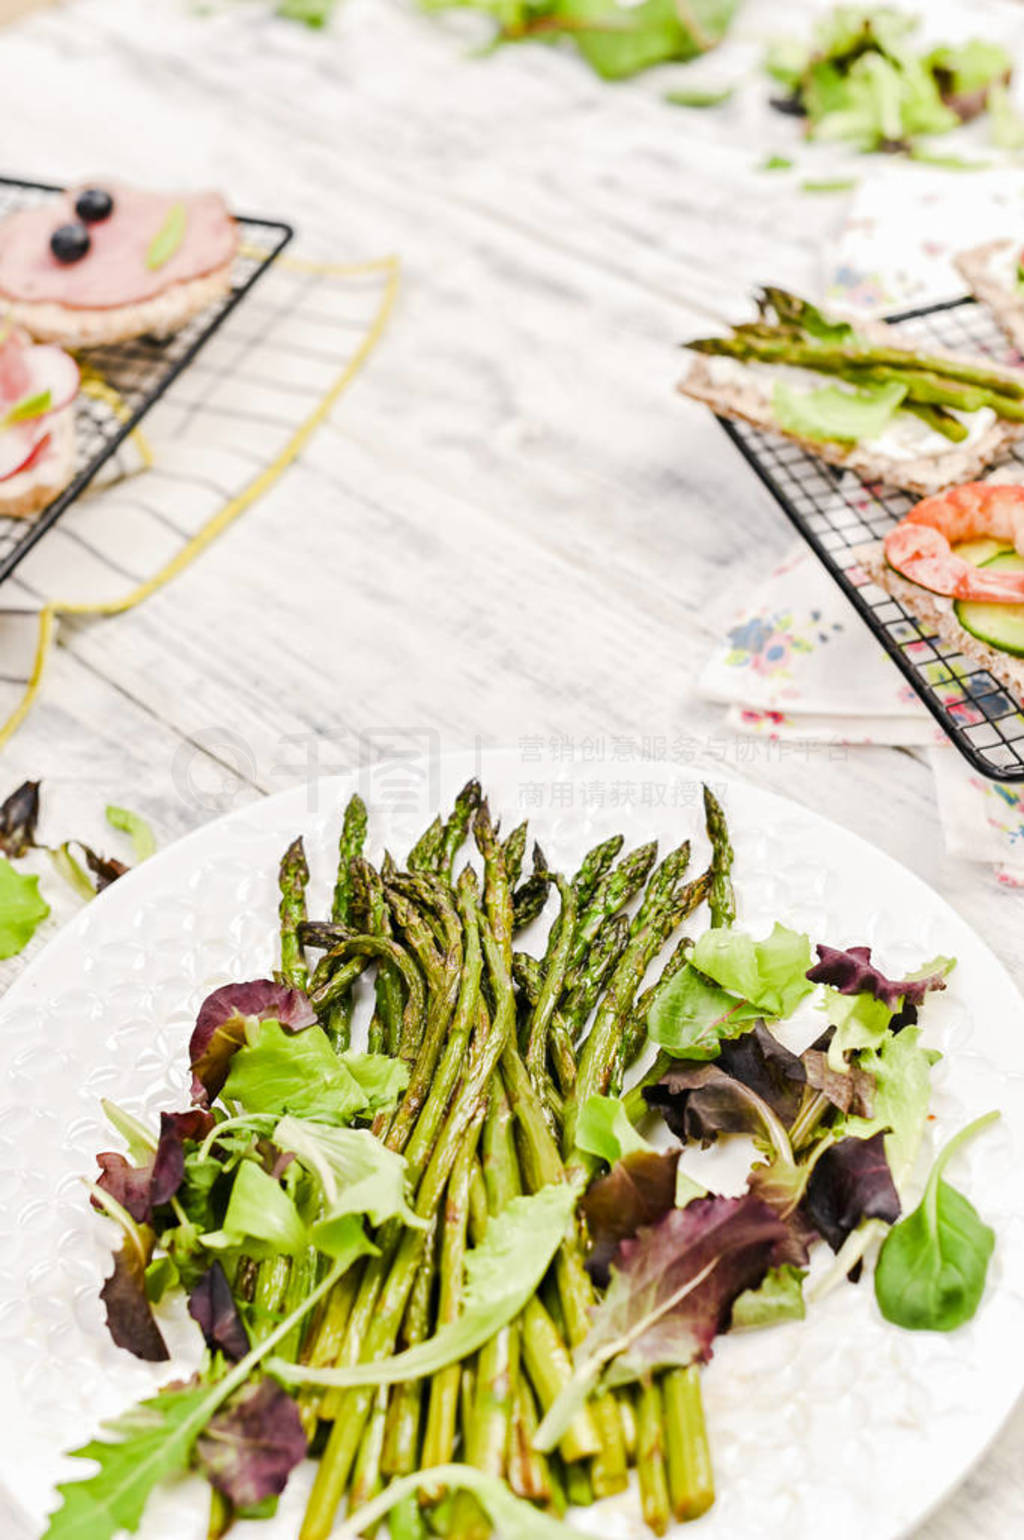 Summer snack sandwiches and asparagus, on a white wooden table.